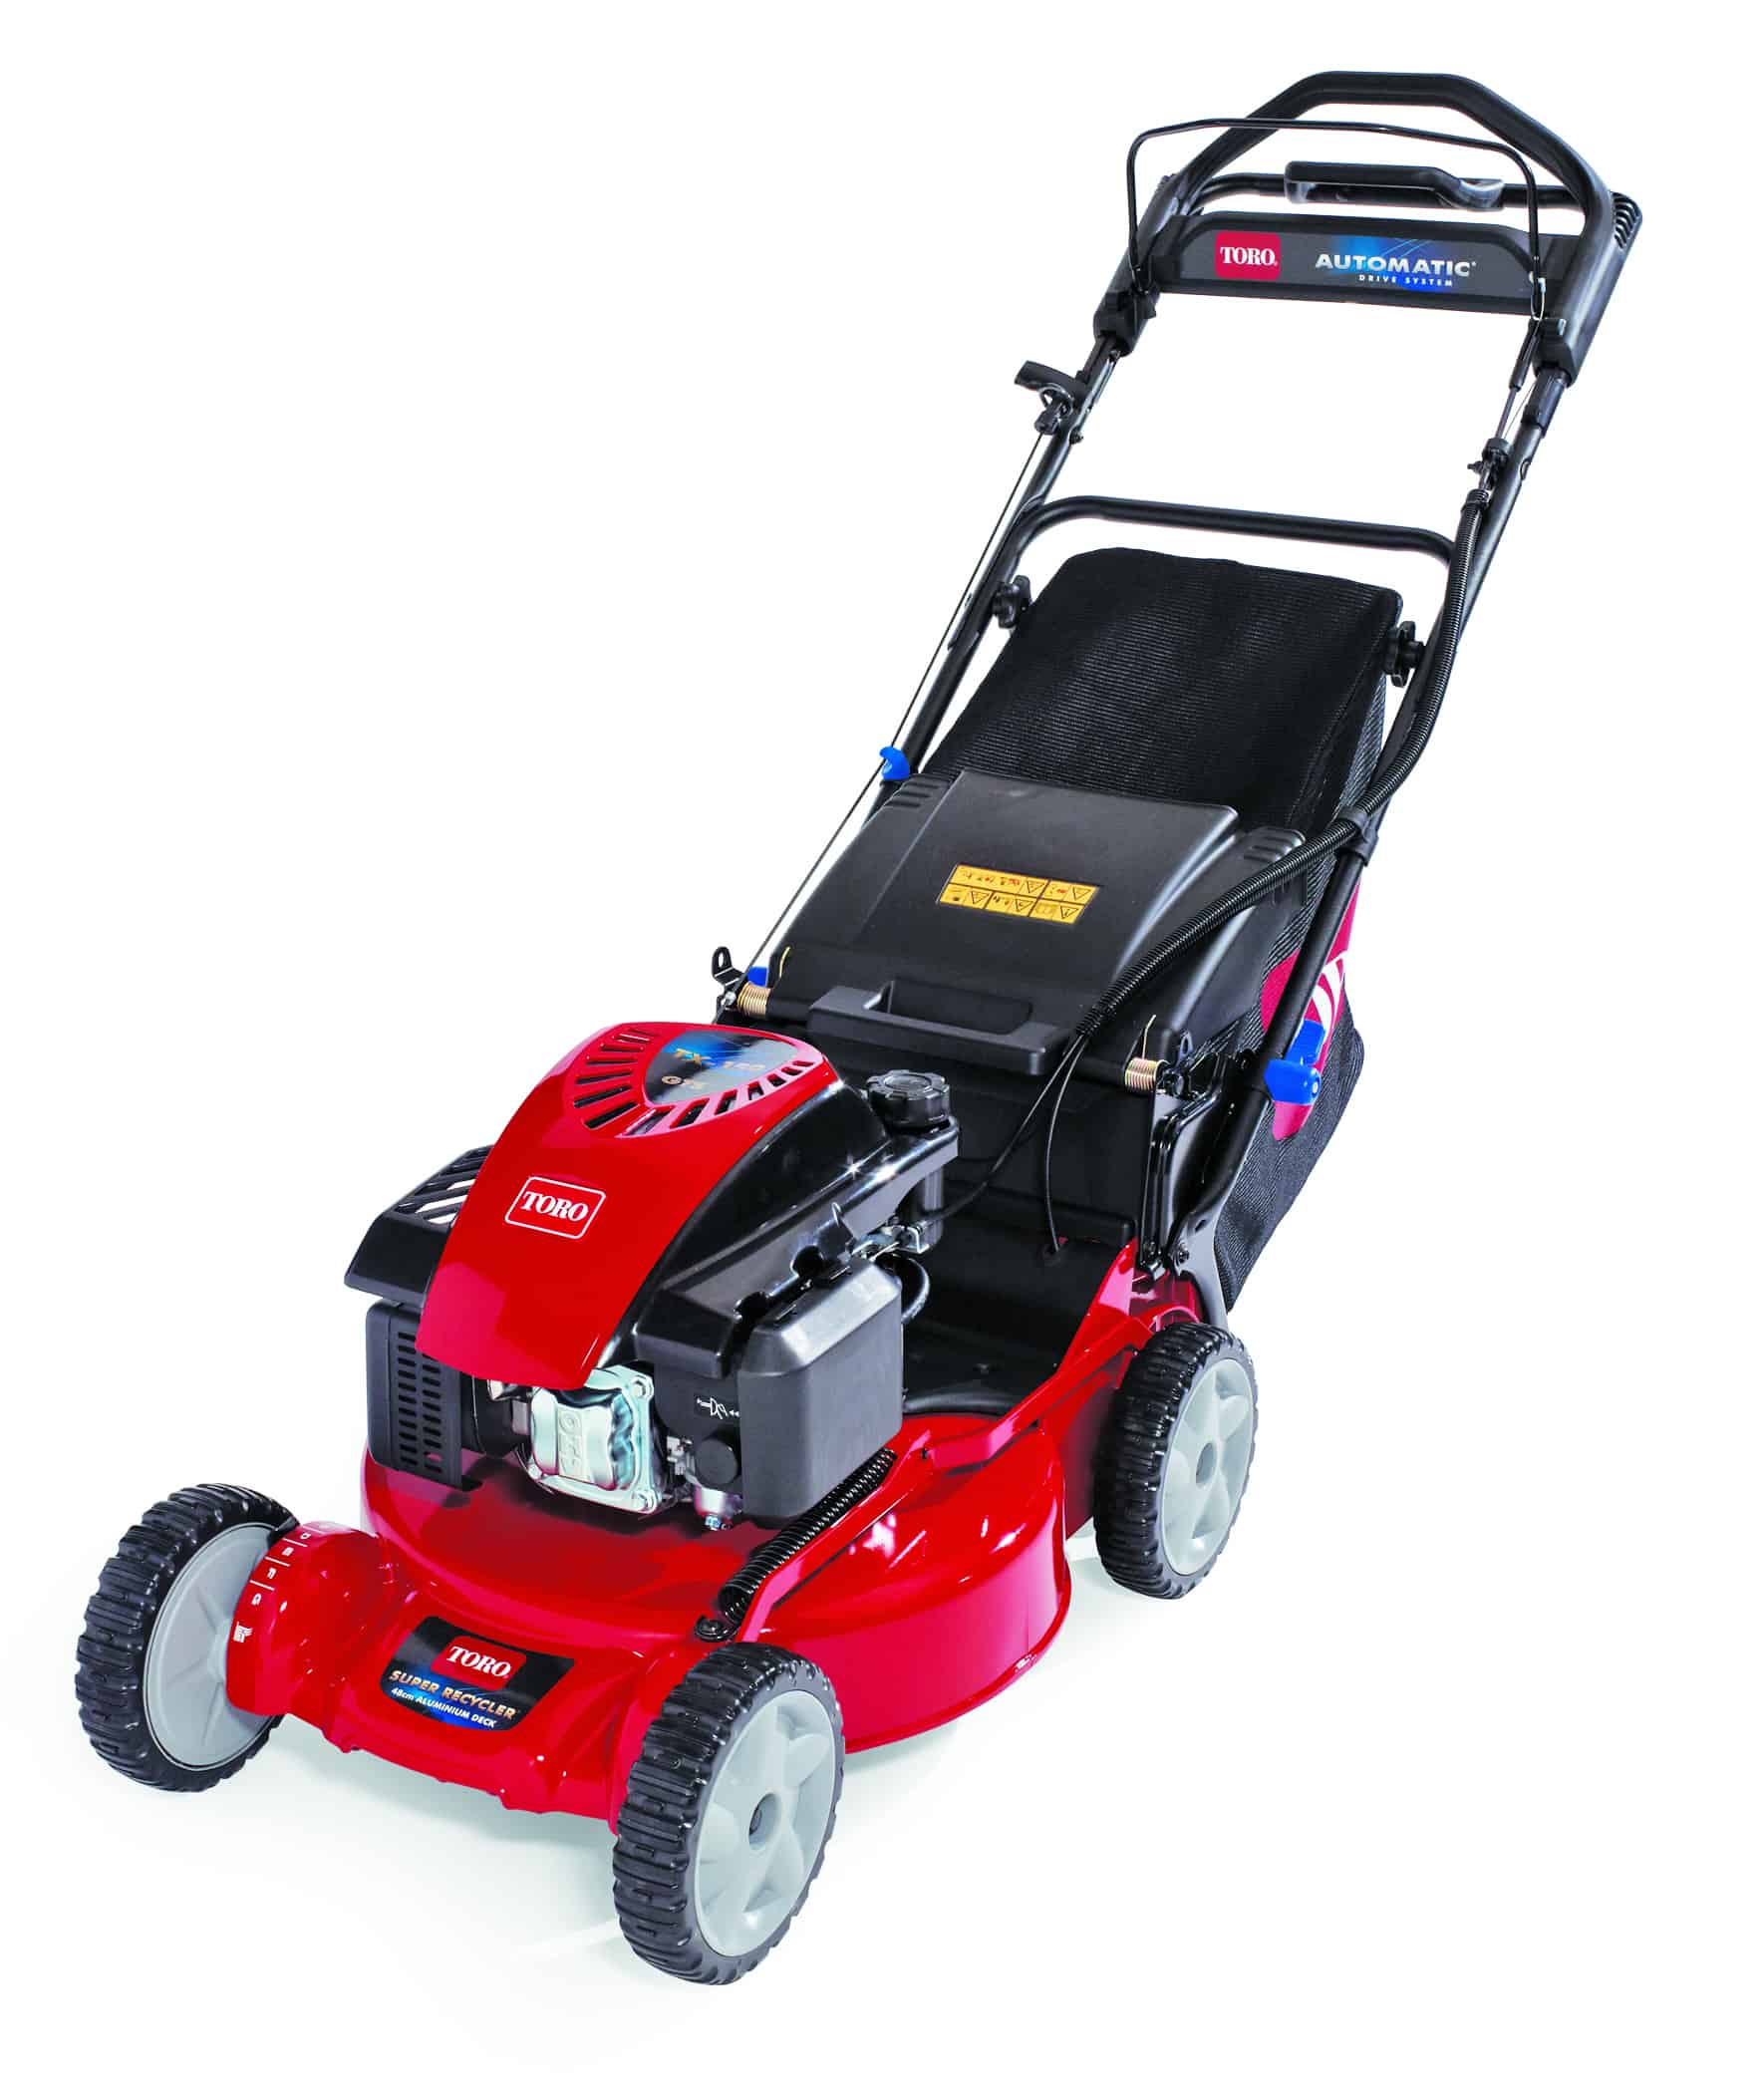 22in Recycler Lawn Mower